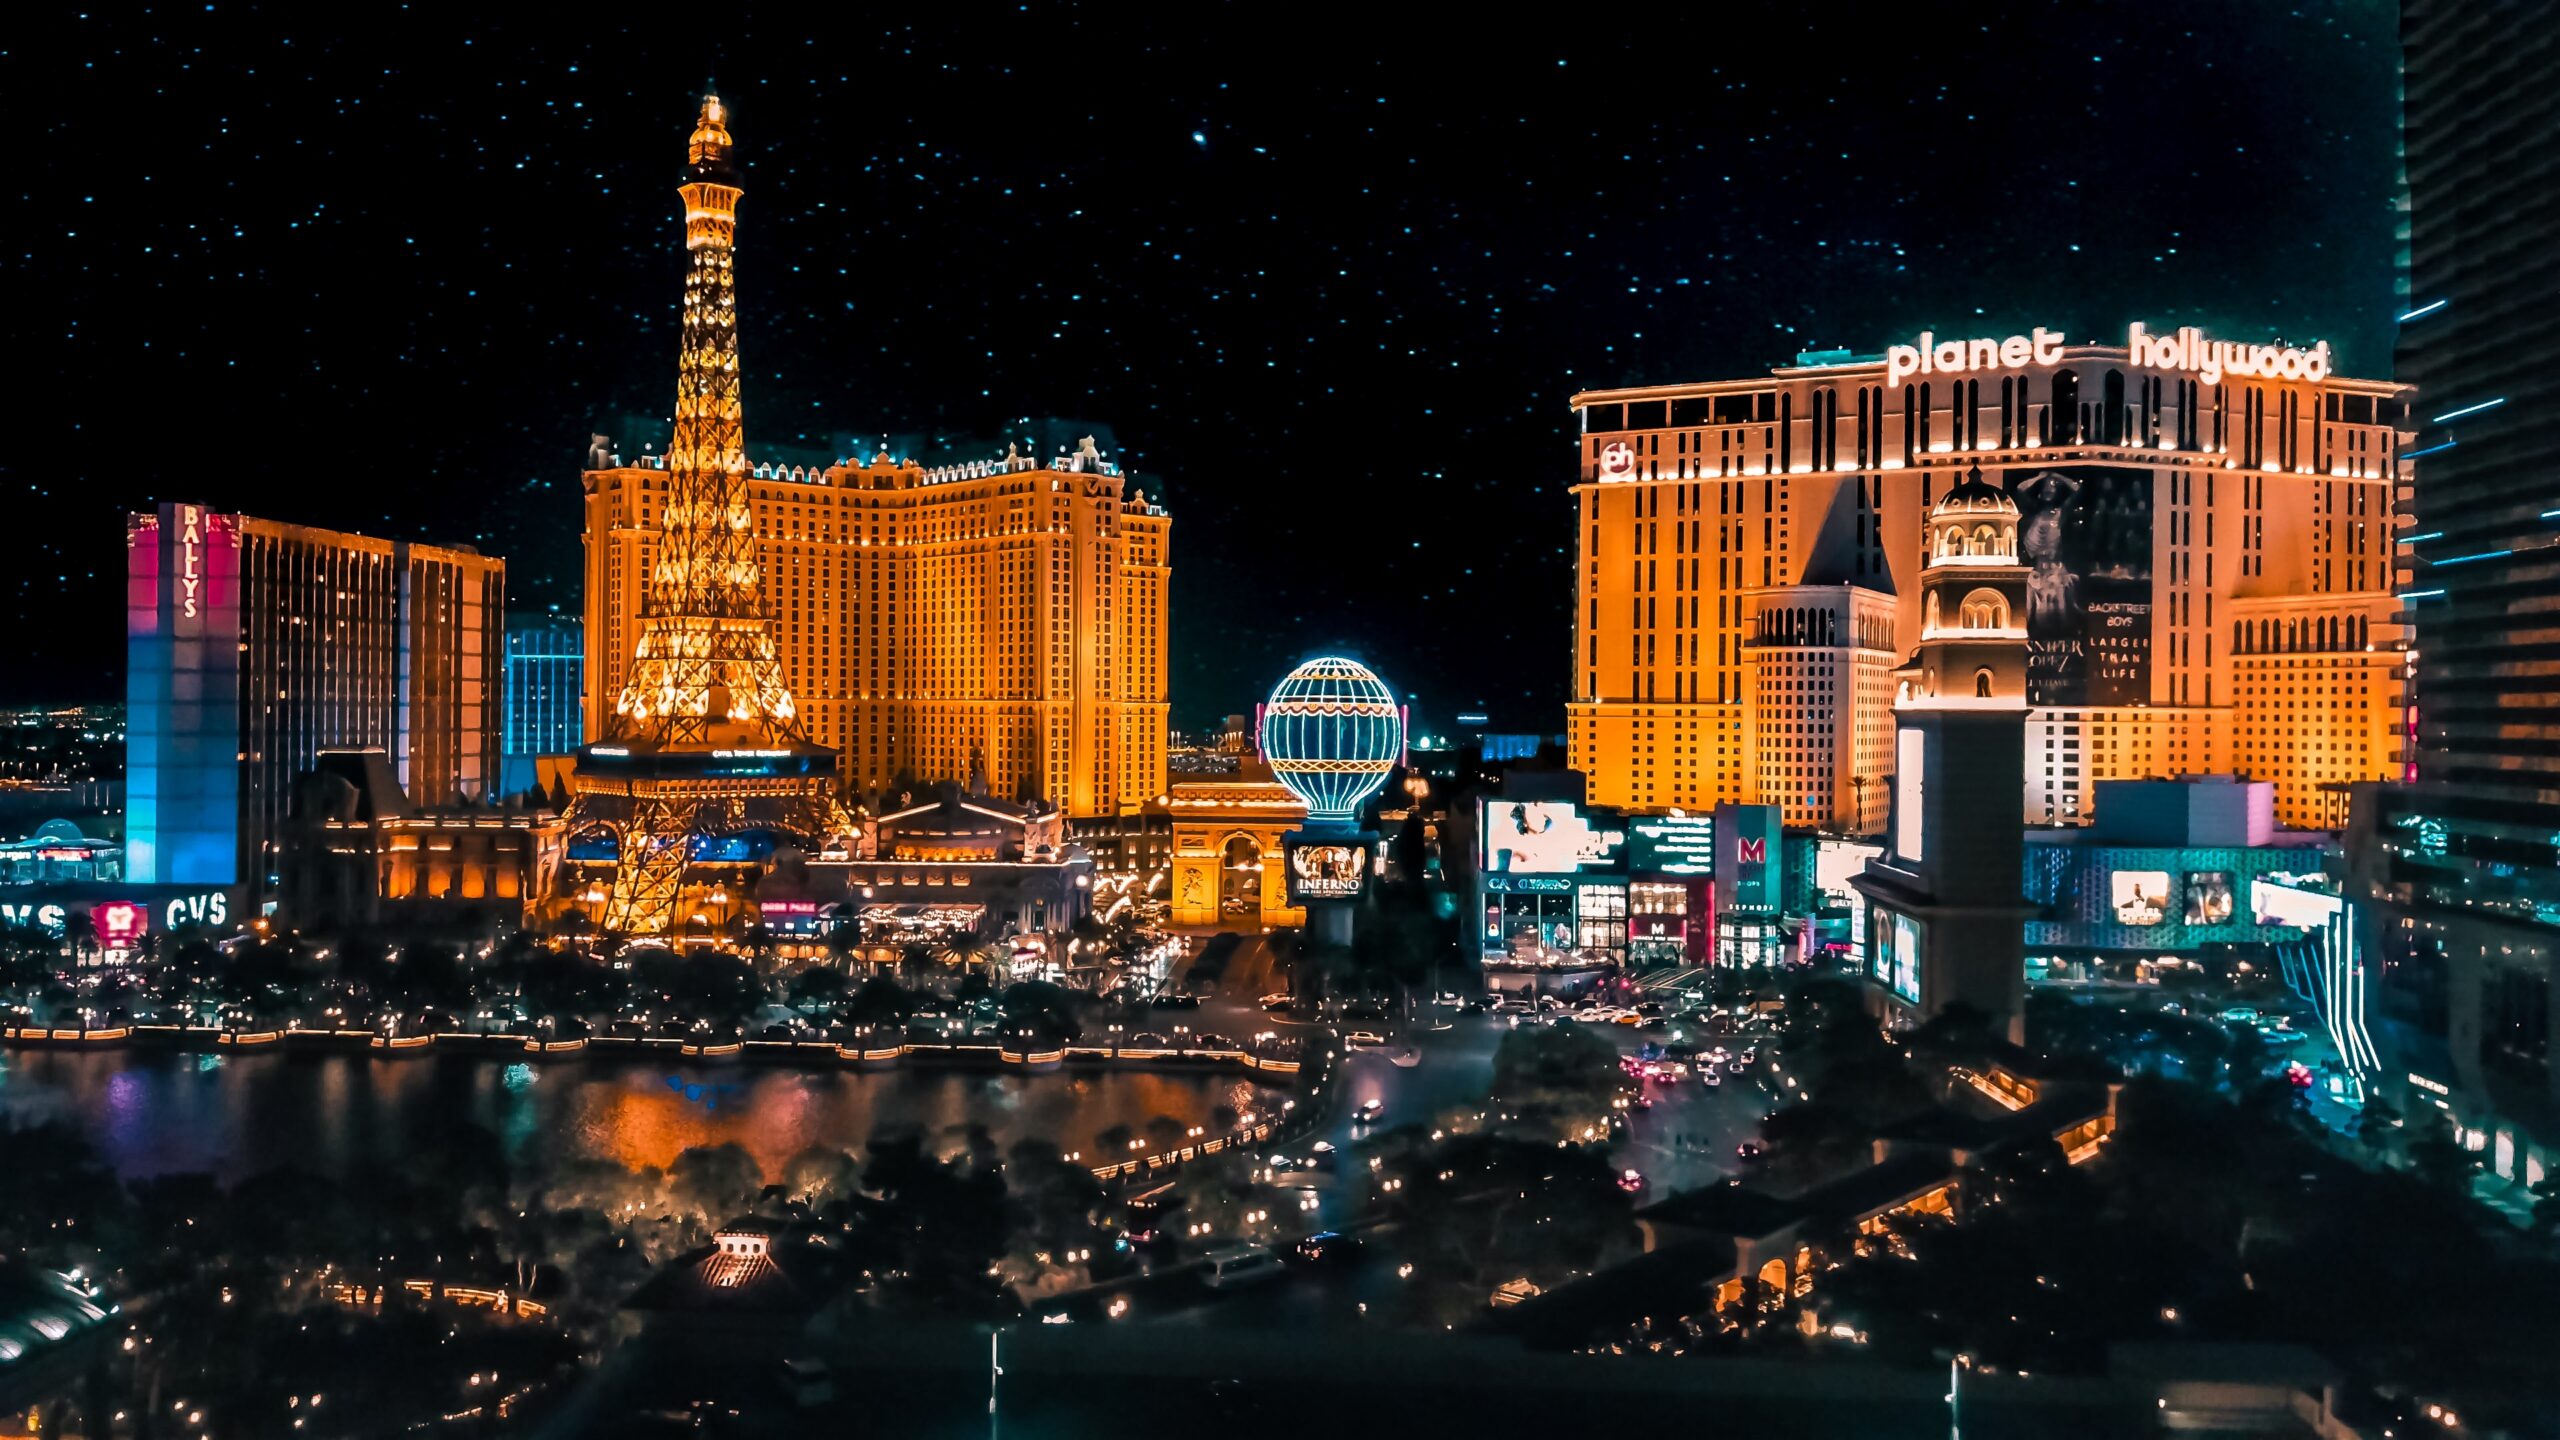 Las Vegas strip with many tourist attractions that are protected by surveillance cameras